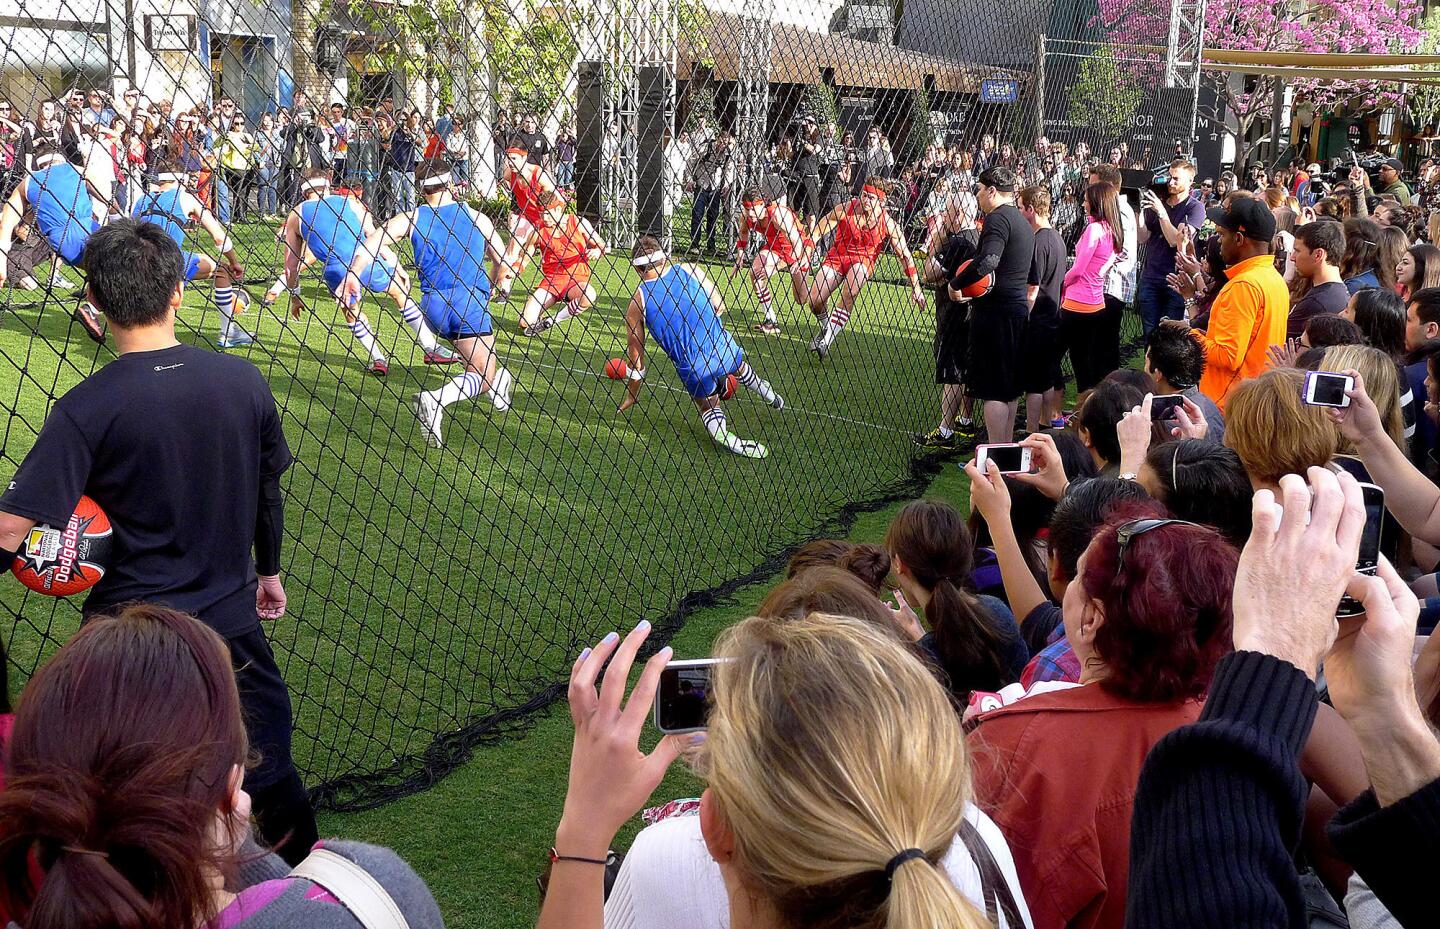 Photo Gallery: Bachelorette dodge ball match recorded at Americana at Brand